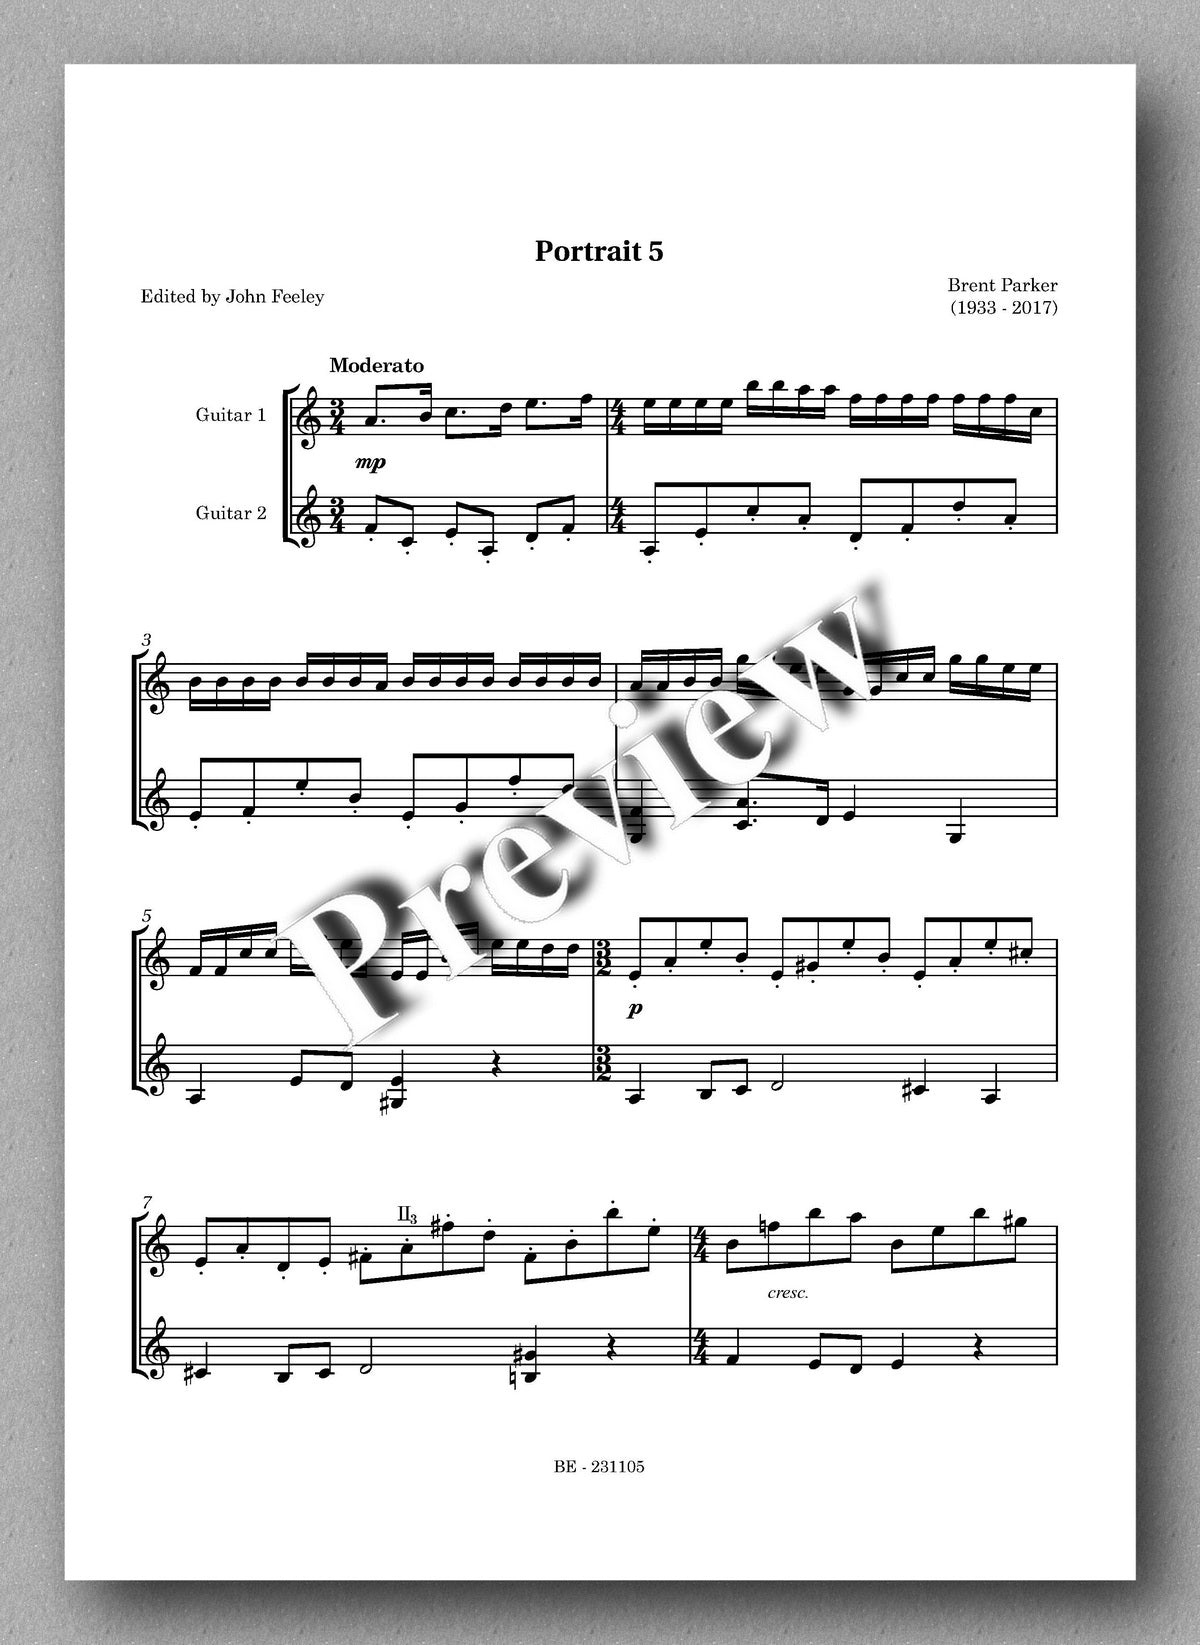 Five Portraits by Brent Parker - preview of the music score 5